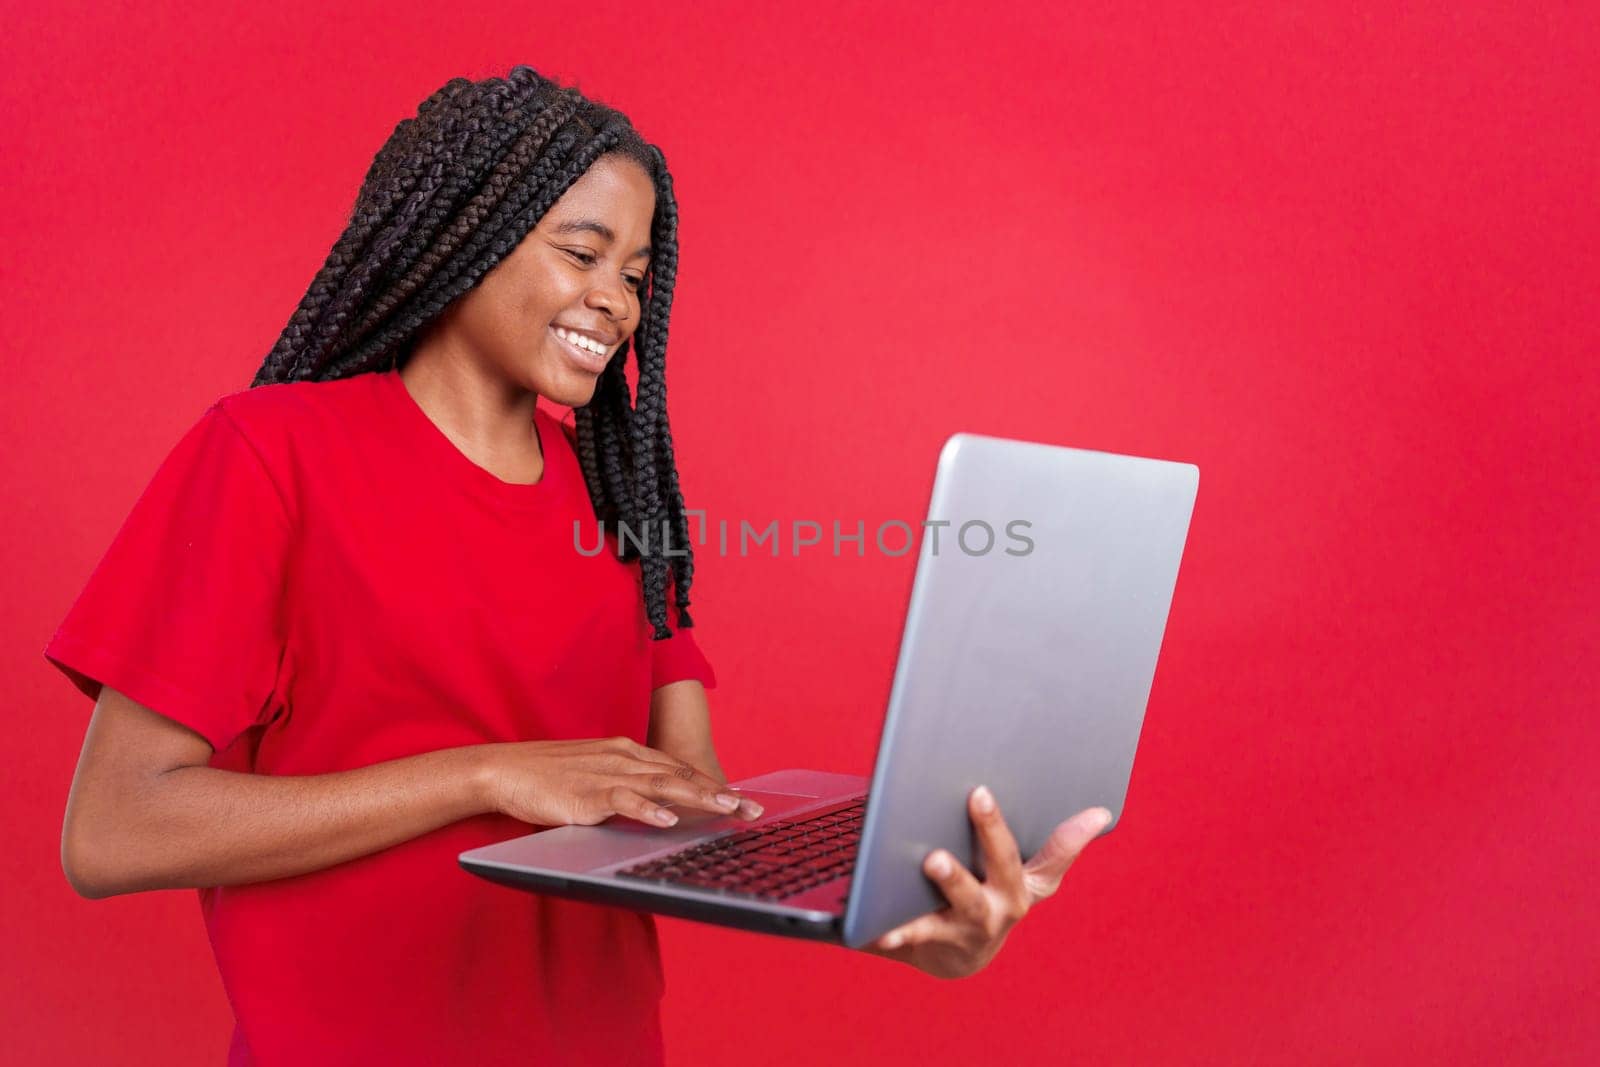 African woman smiling while using a laptop in studio with red background